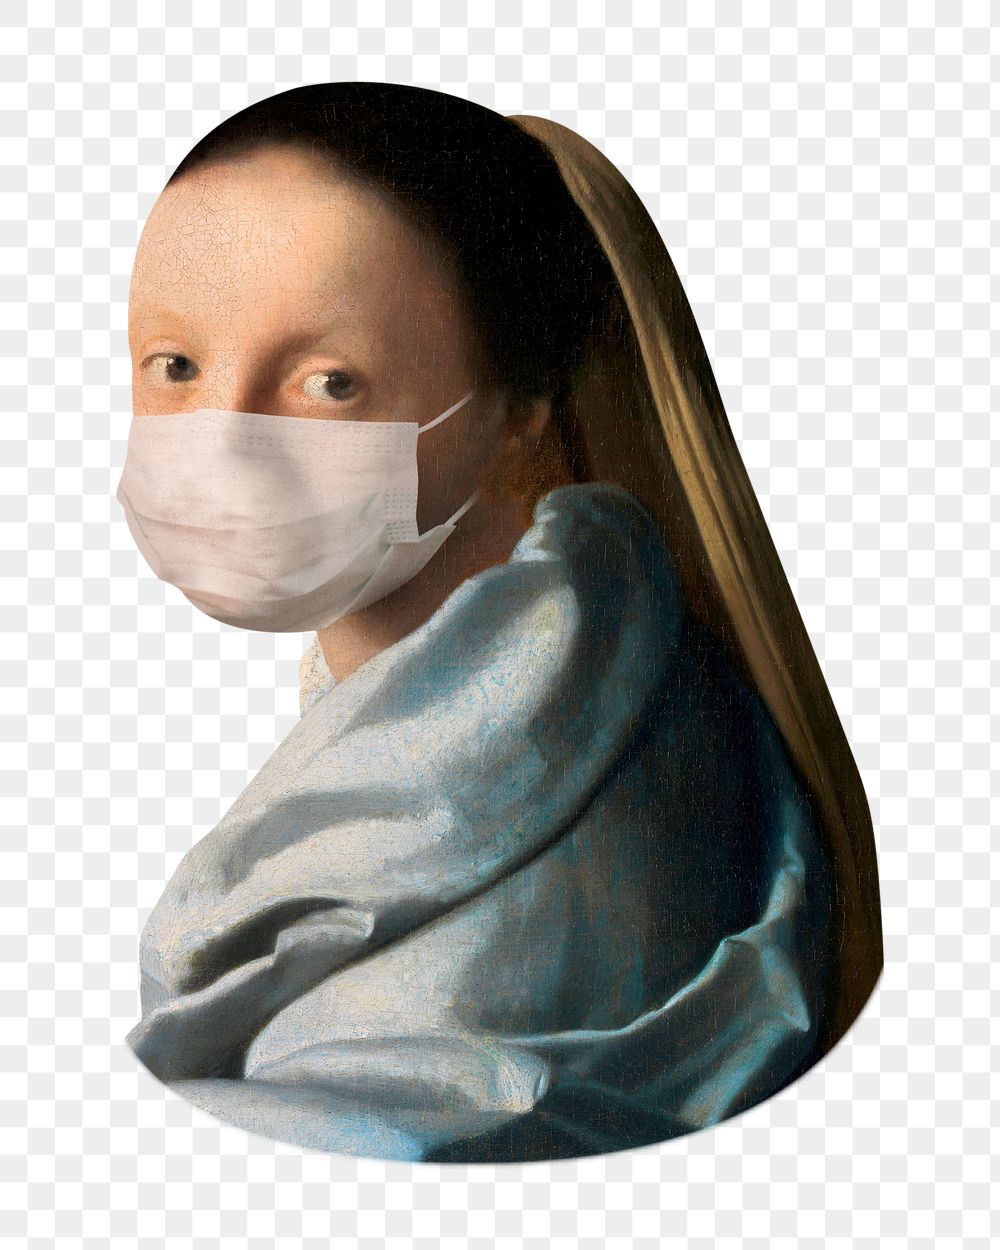 Png Vermeer's young woman wearing a face mask, vintage illustration, transparent background. Remixed by rawpixel.